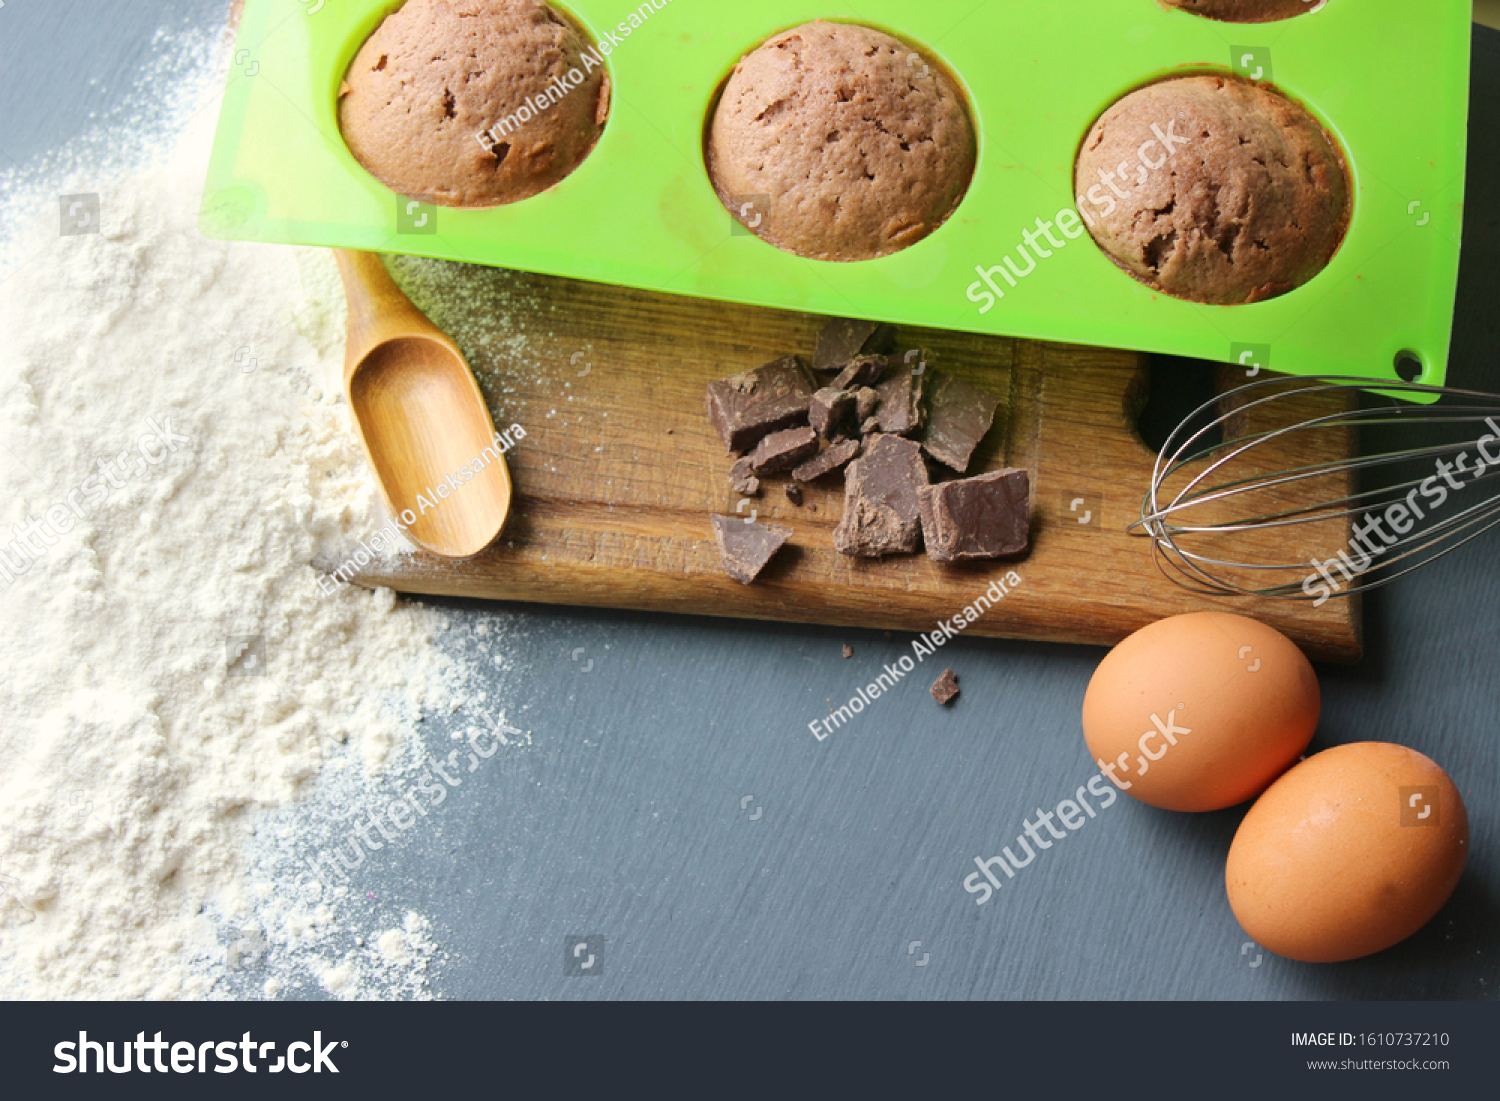 Homemade muffins with chocolate. Ingredients for baking. Copy space. Baking ingredients for chocolate brownies. #1610737210